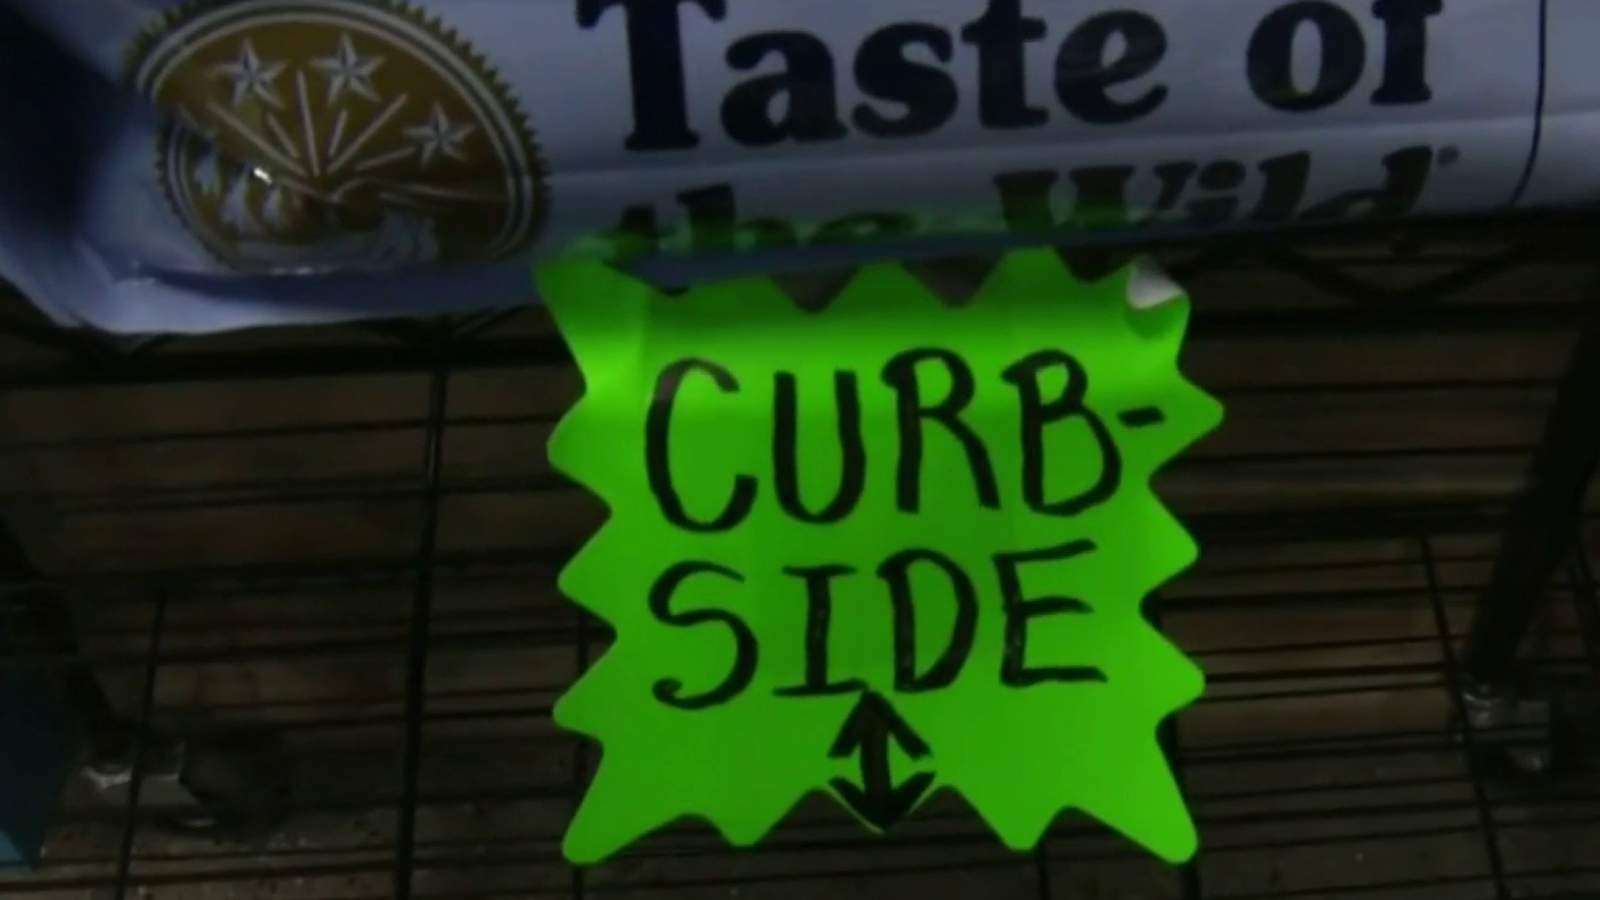 Local pet supply business offering curbside pickup options during pandemic